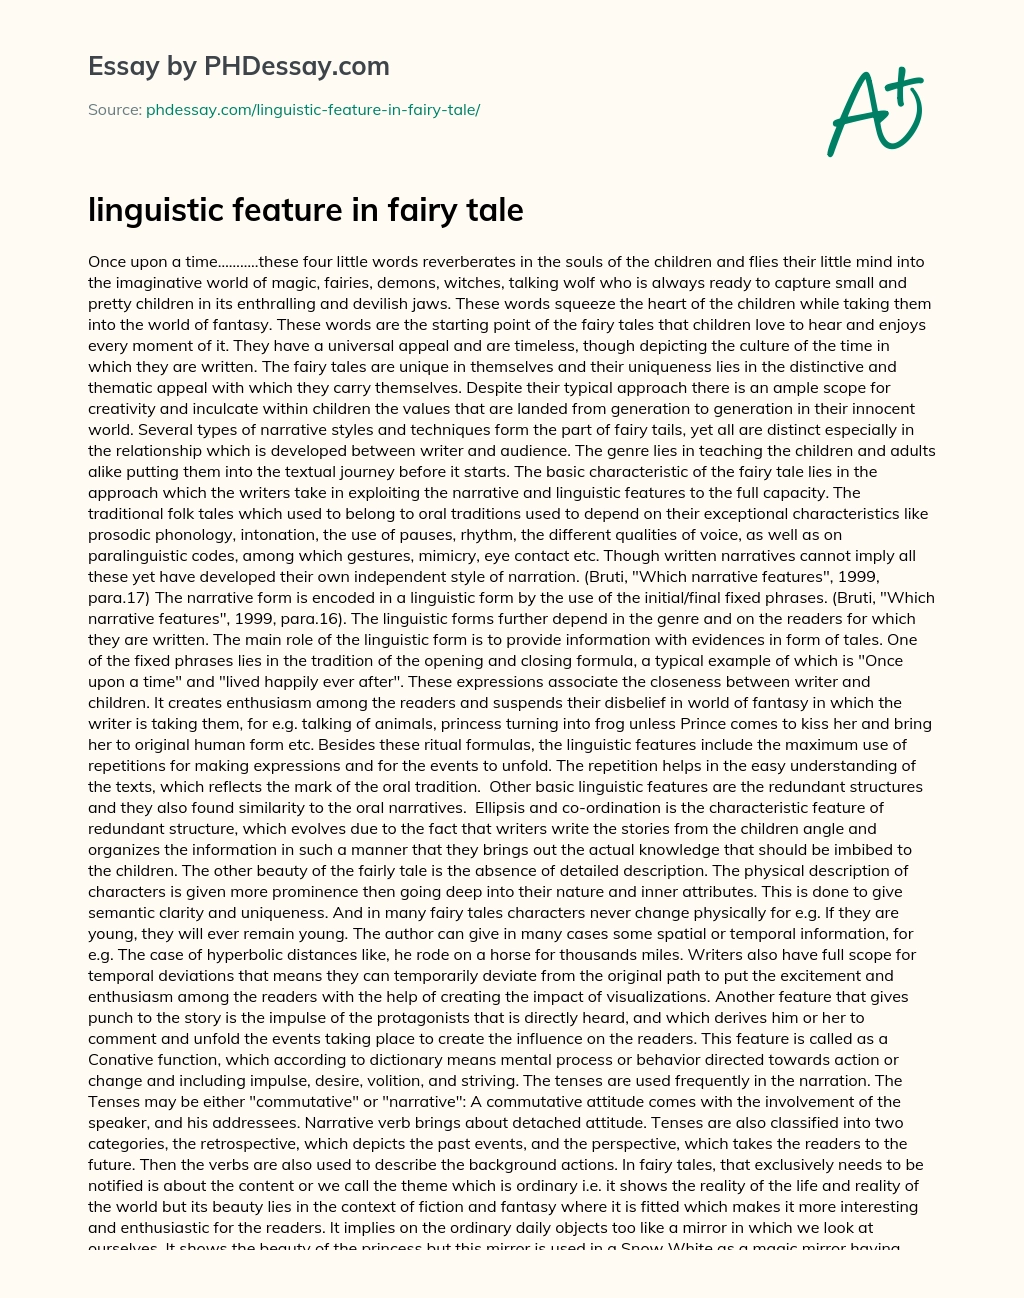 linguistic feature in fairy tale essay